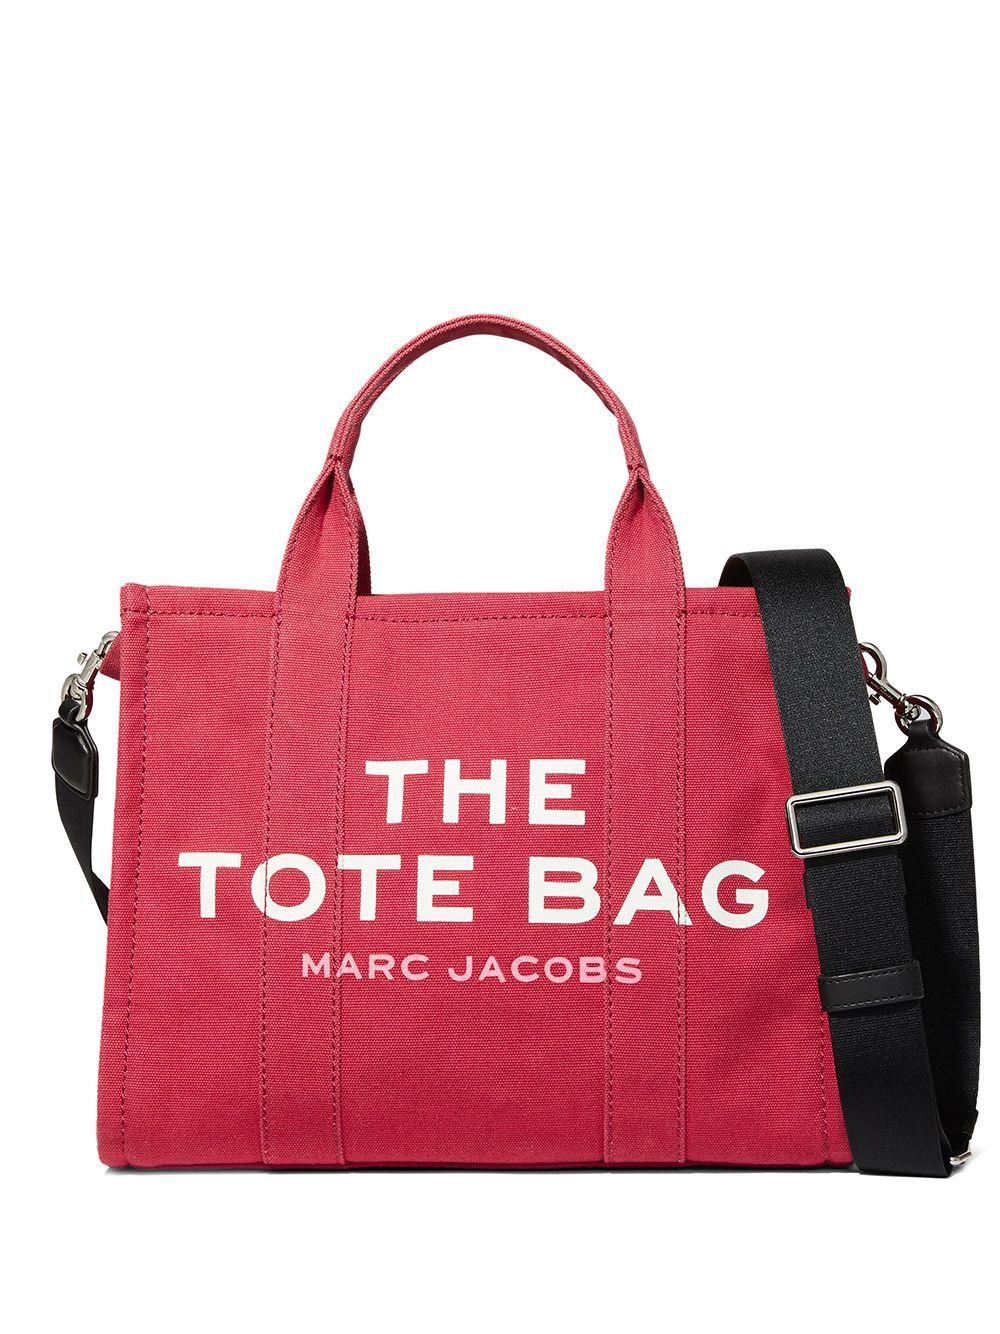 Marc Jacobs Medium The Tote Bag in Pink | Lyst